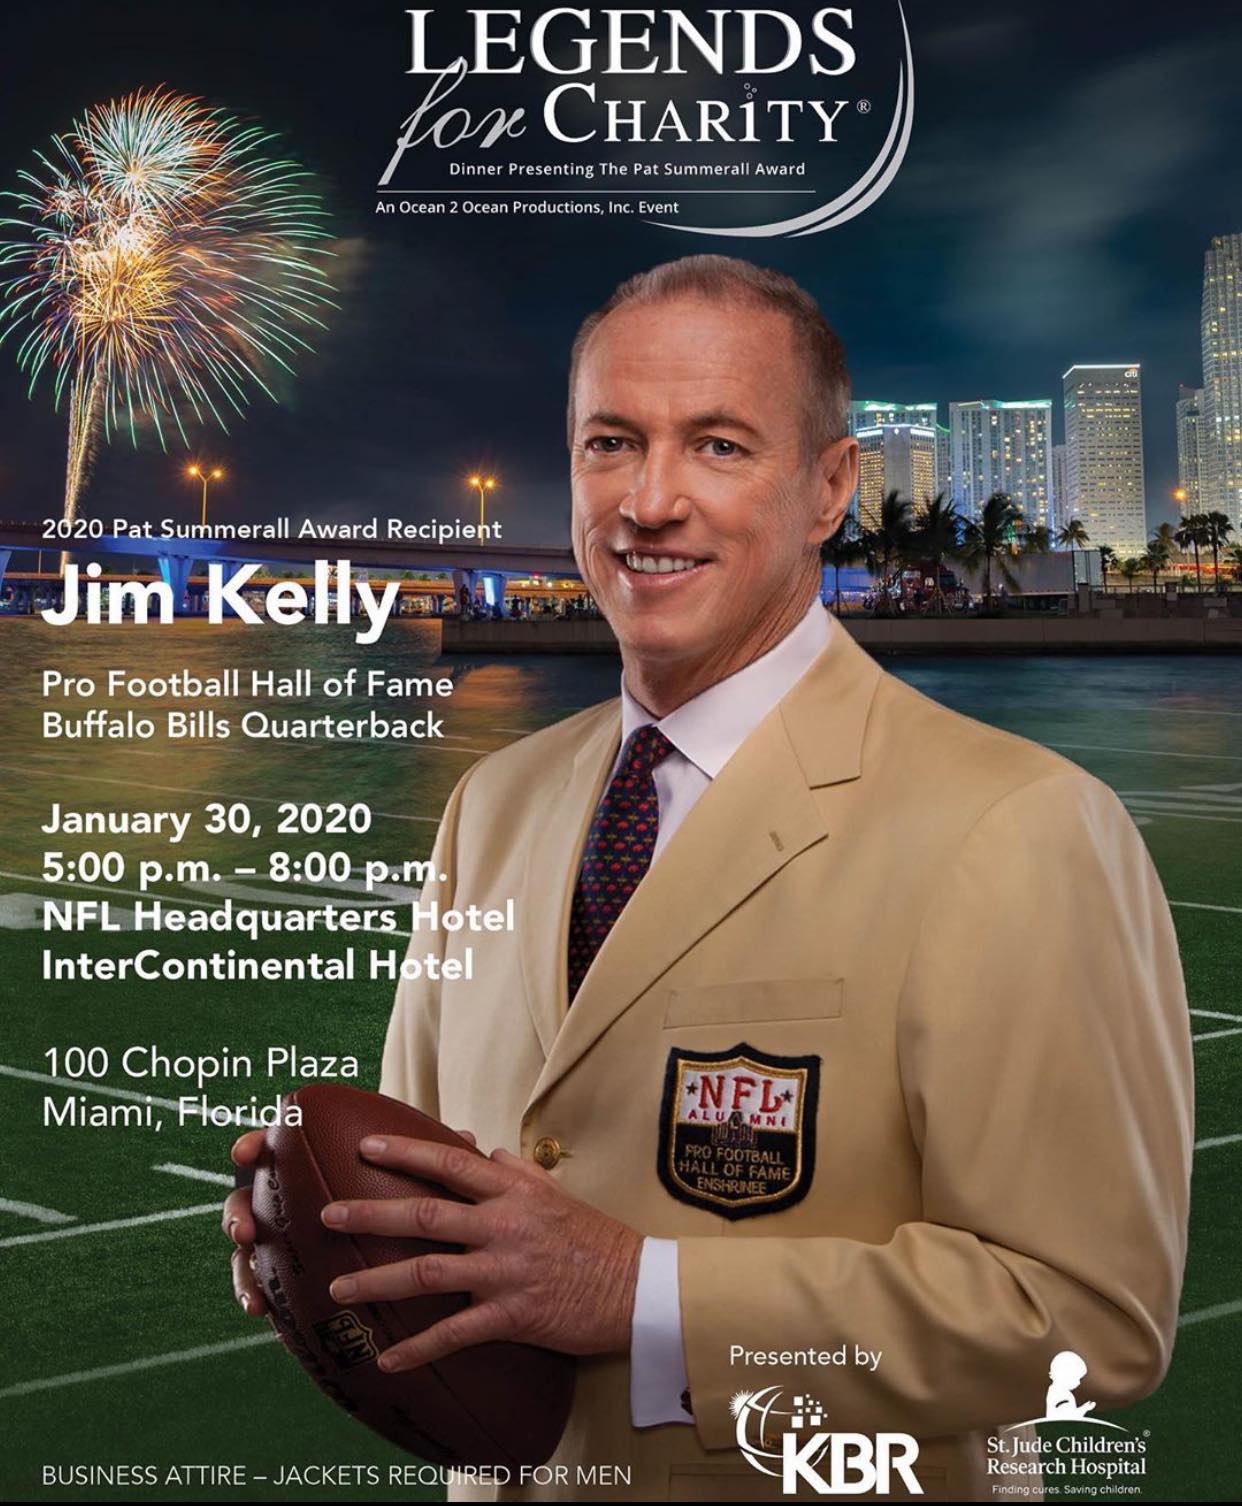 A Tribute to Jim Kelly – Supporting St. Jude Children’s Research Hospital